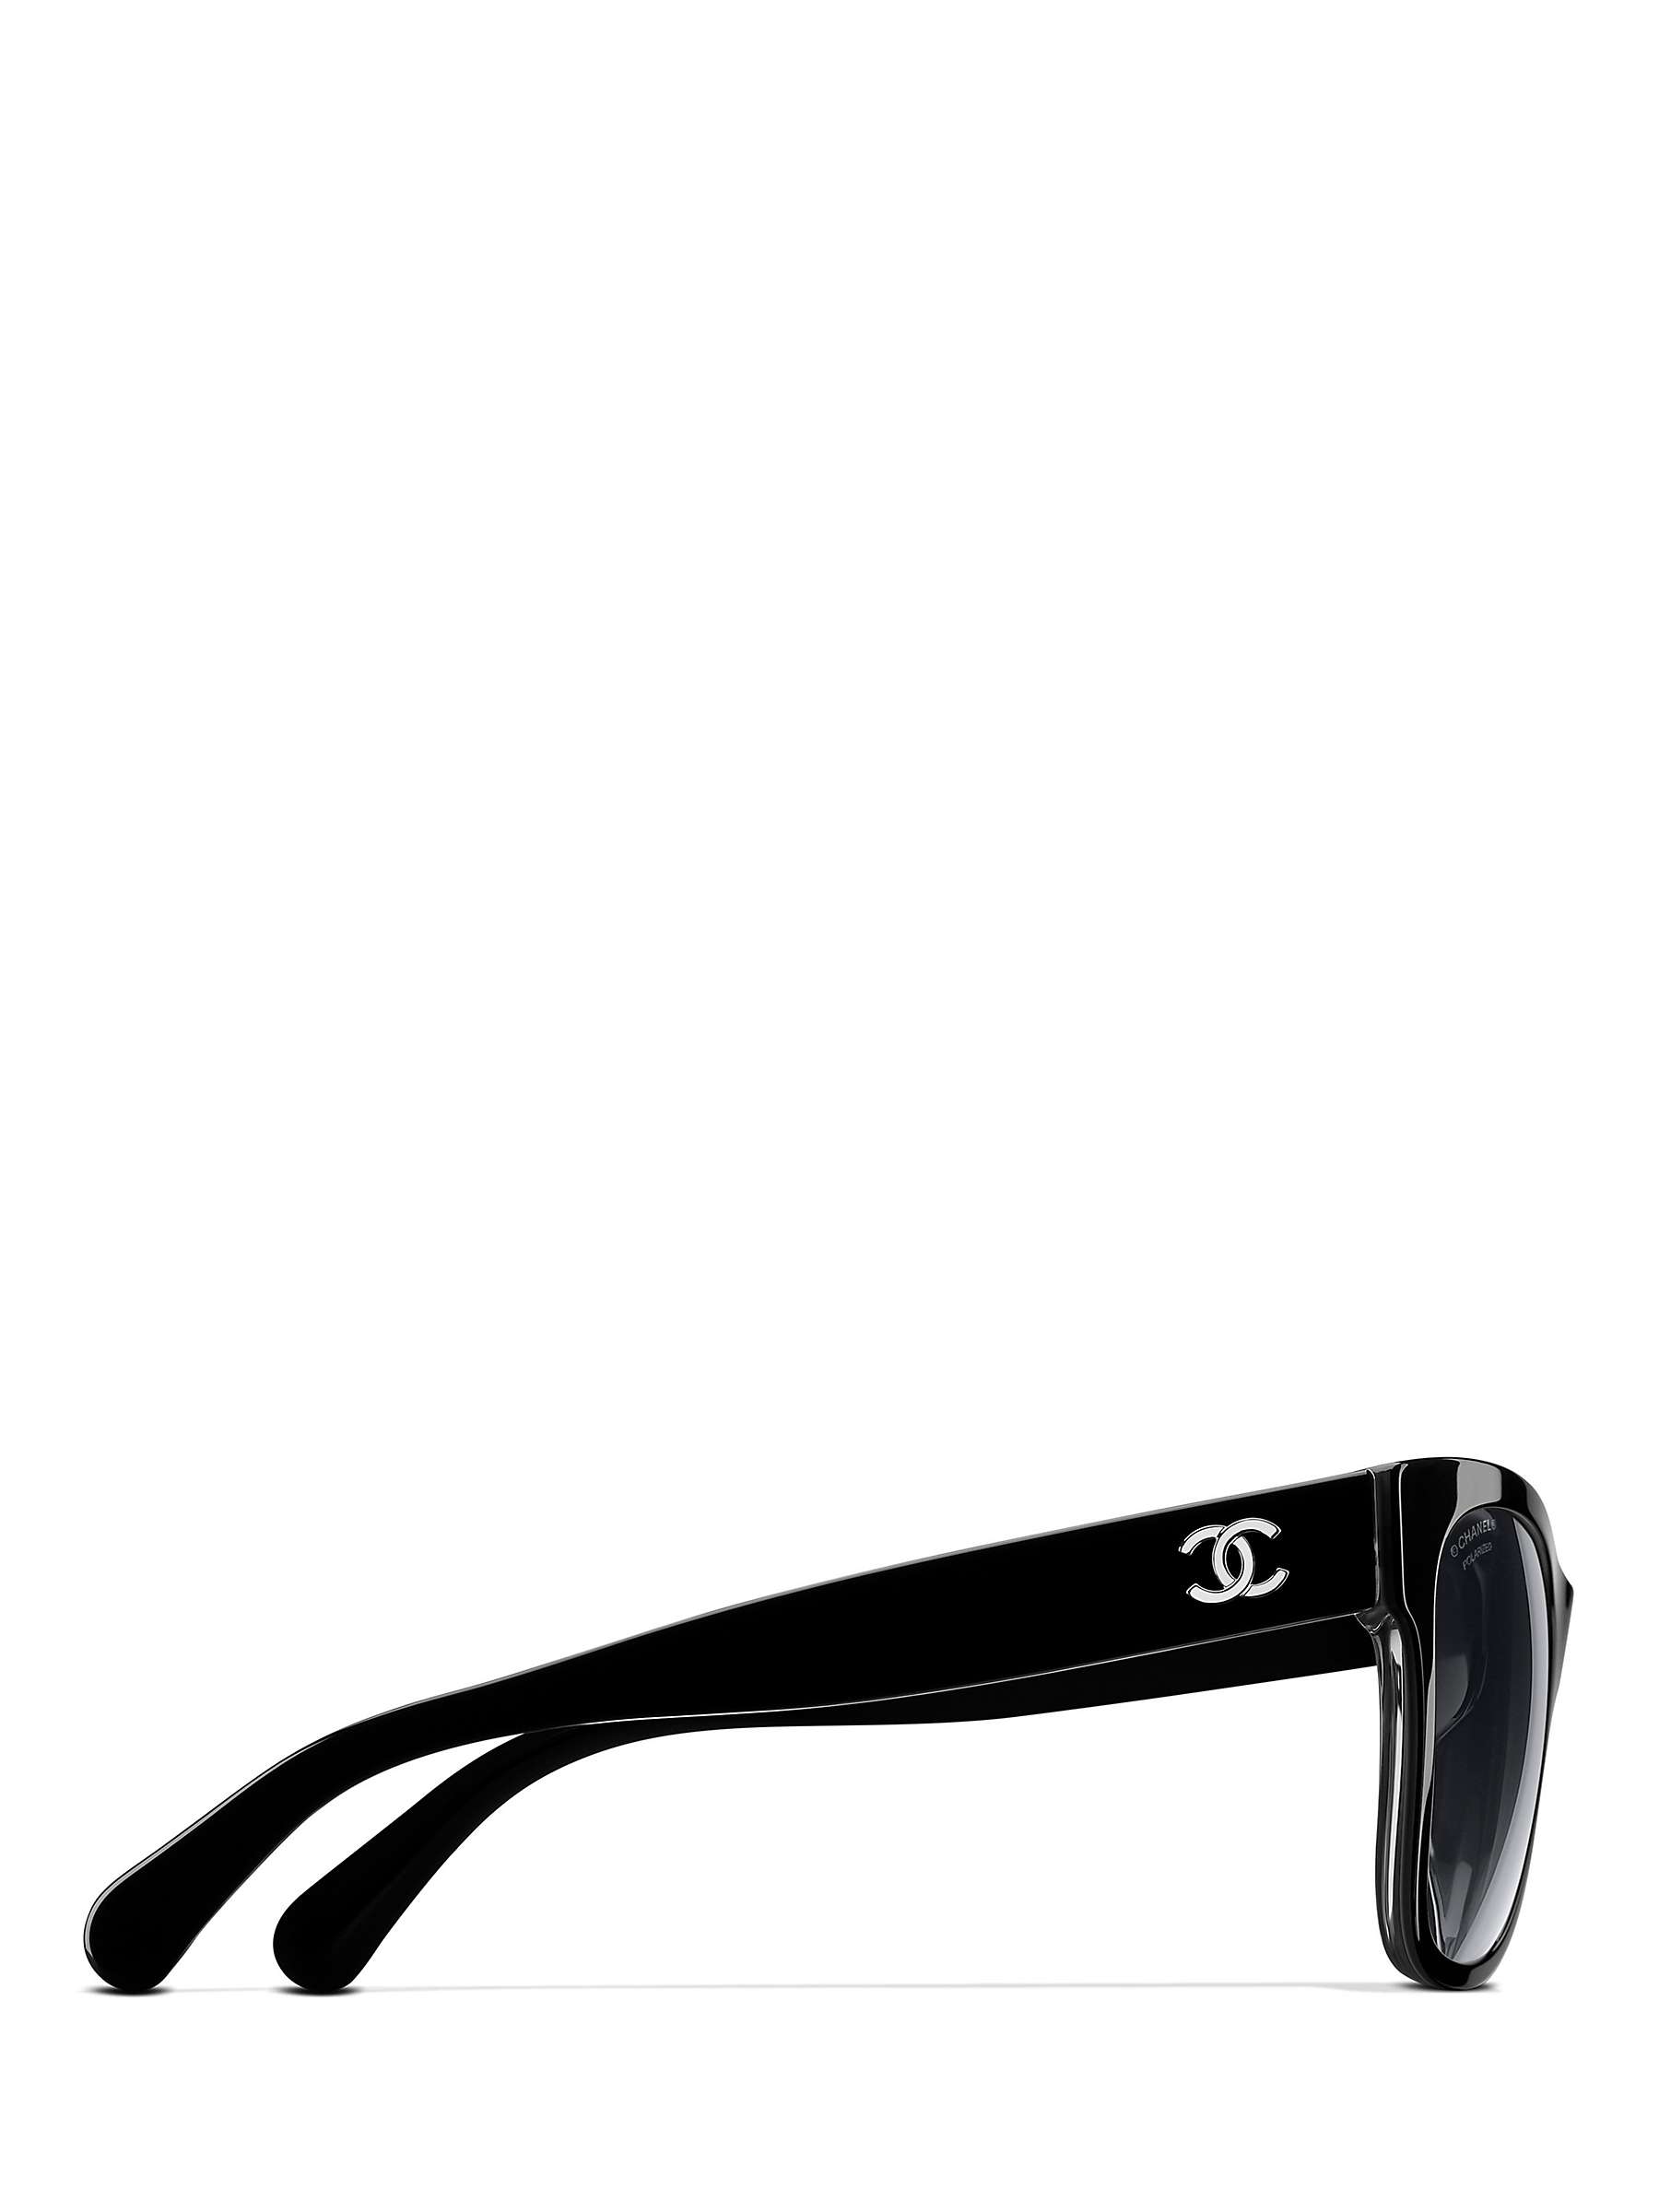 Buy CHANEL Square Sunglasses CH5380 Black Online at johnlewis.com